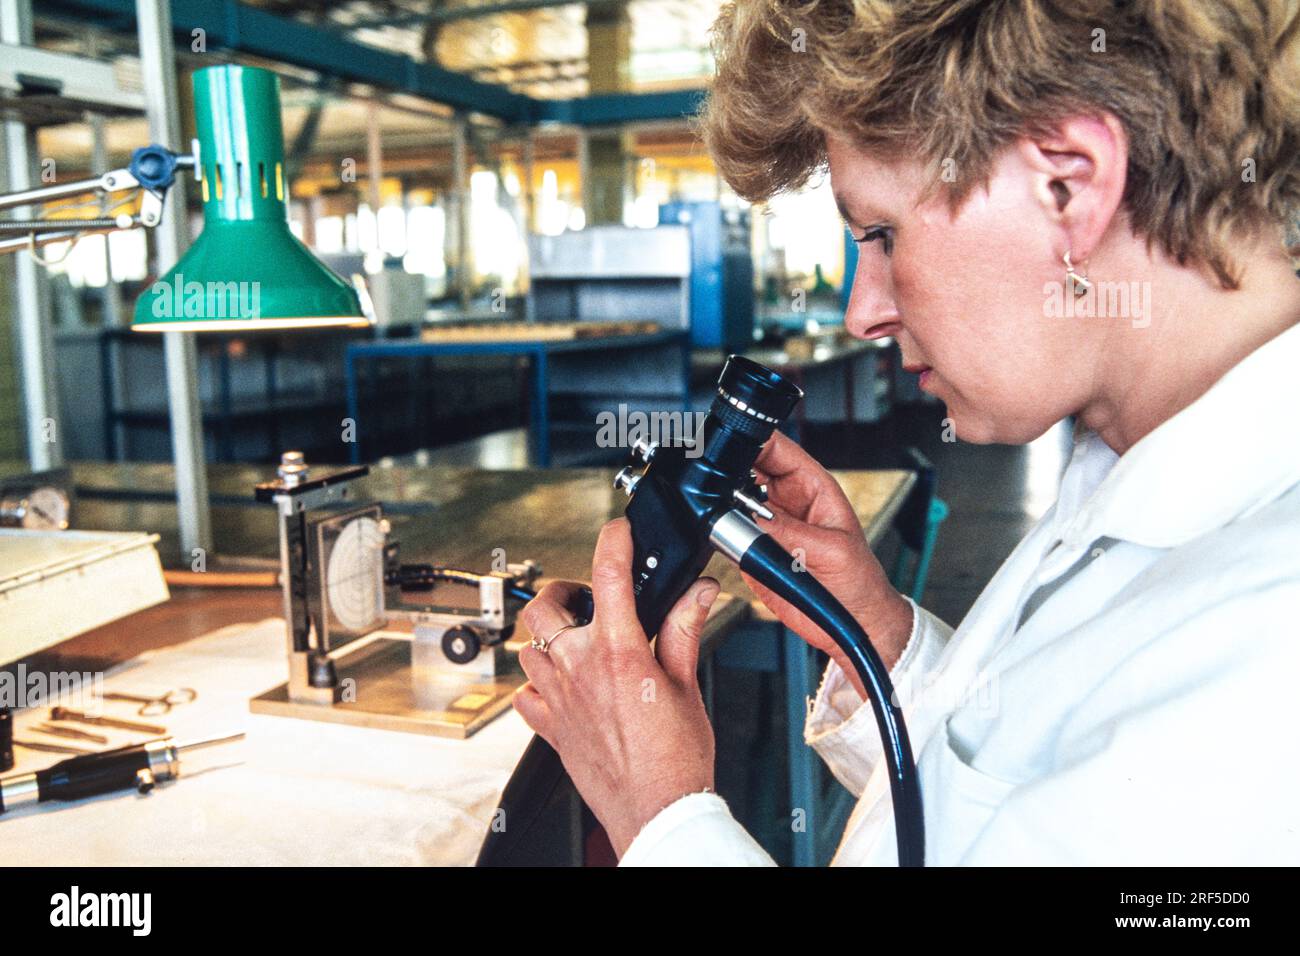 A technician checks the optical alignment of an endoscope after assembly at the LOMO Optical Factory, December 10, 1994 in St. Petersburg, Russia. The Leningrad Optical Mechanical Association begun production in 1914 under the Soviet Union and was privatized in 1994 specializing in cameras, telescopes, microscopes and endoscopes. Stock Photo